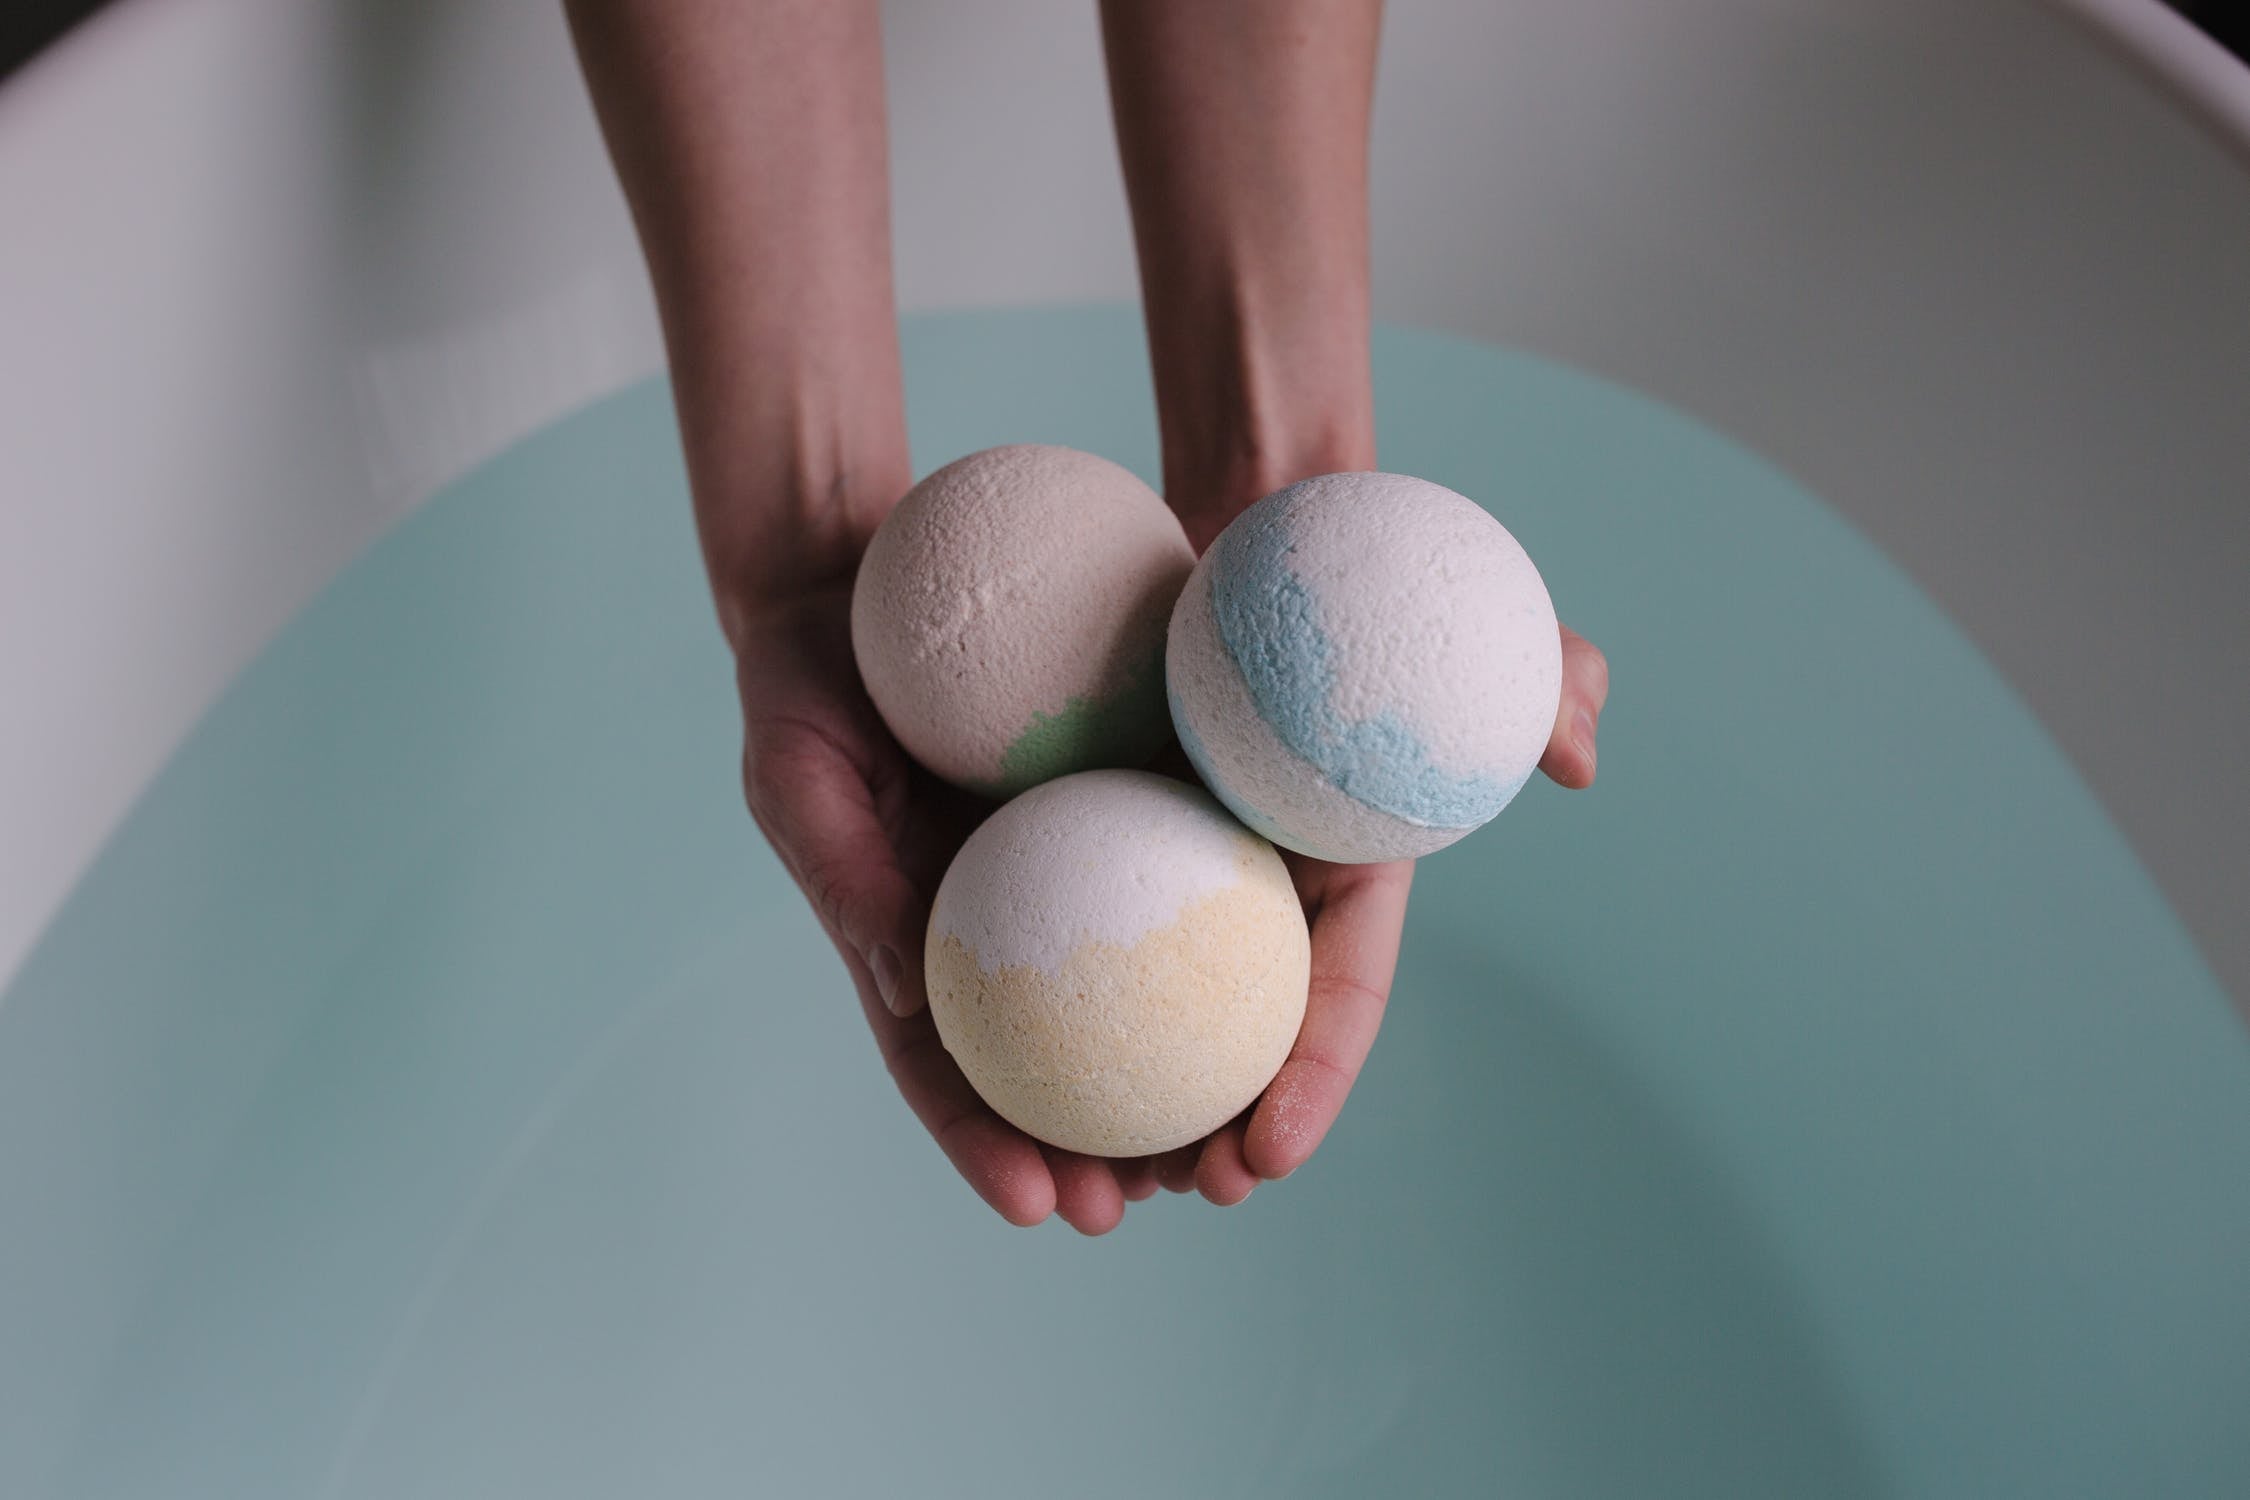 How to Make Bath Bombs at Home